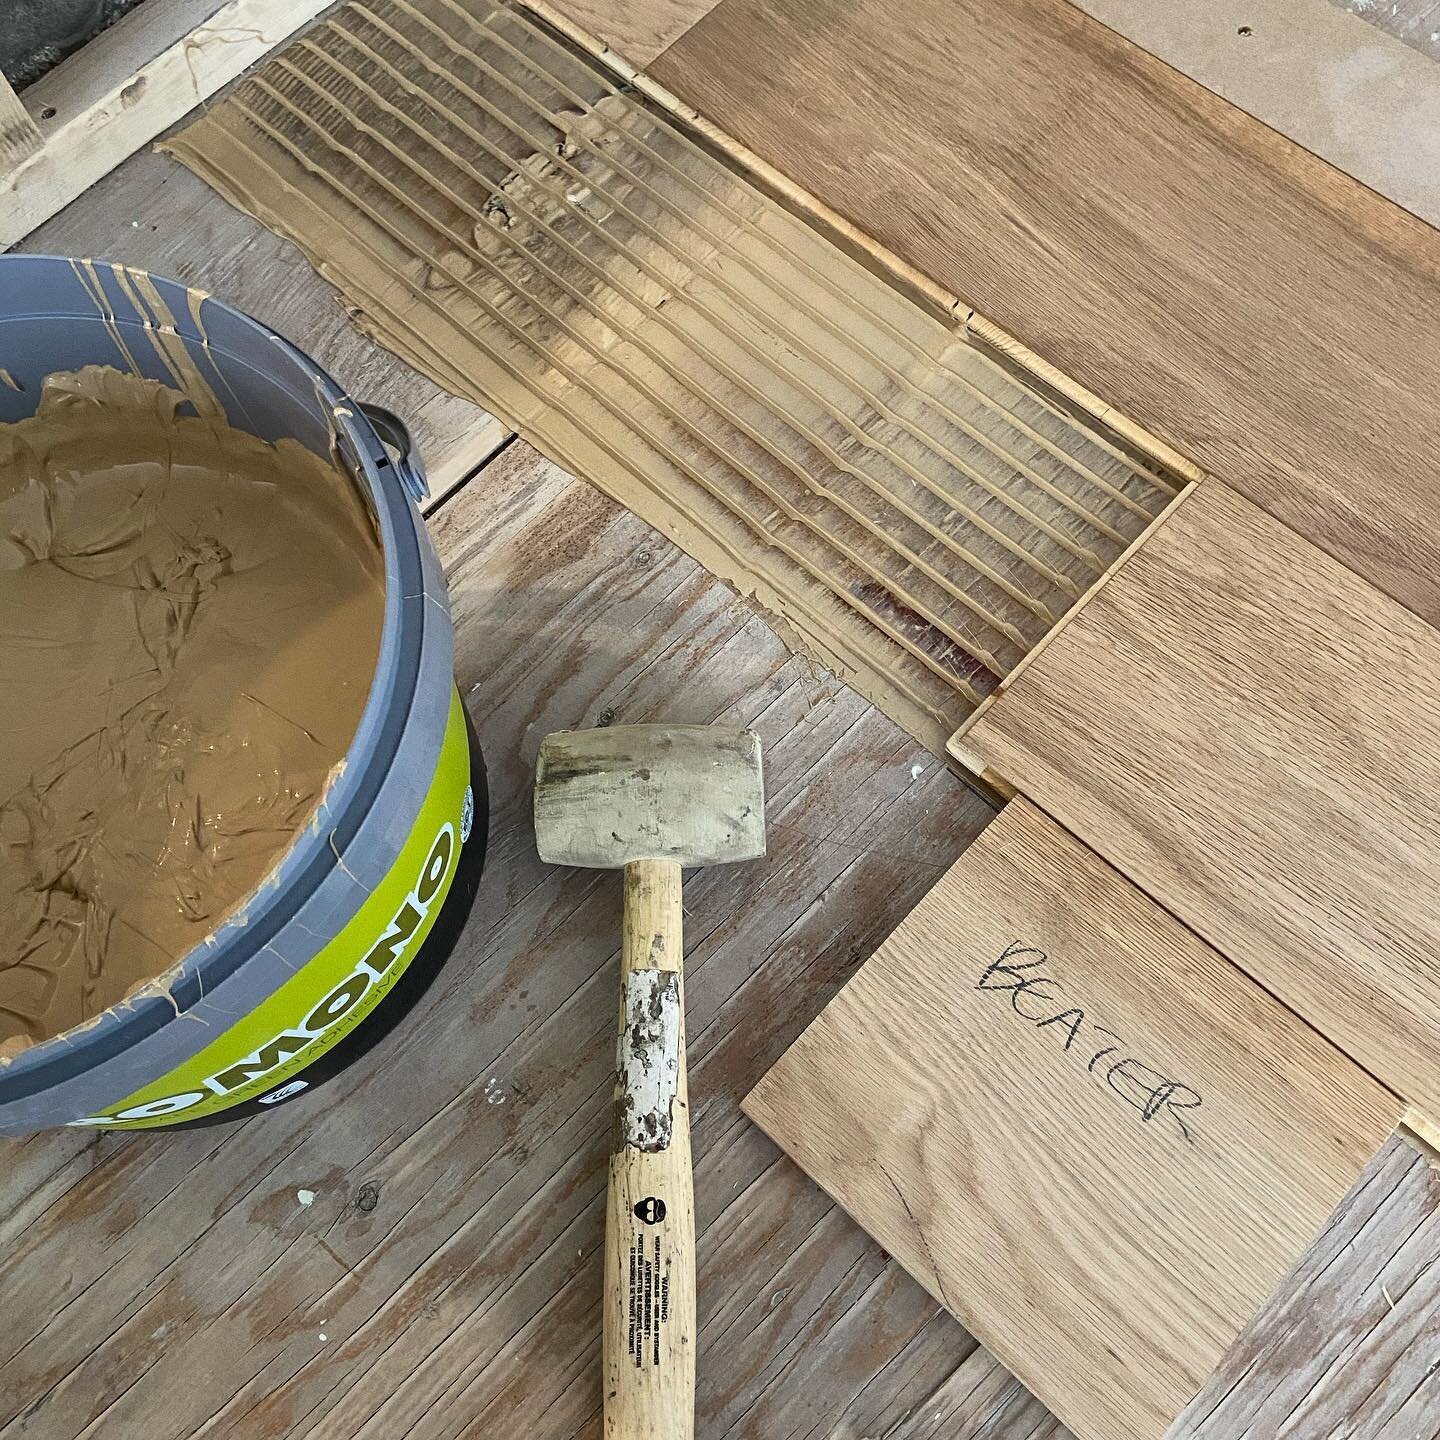 Don&rsquo;t forget your beater block. And keep your tools clean when glueing floors 

#keepitclean #beater #hardwoodfloors #hardwoodflooring #hardwood #whiteoakfloors #whiteoak #carpentry #carpenter #entrepreneurgeneral #brodskybond #brodskyandbond